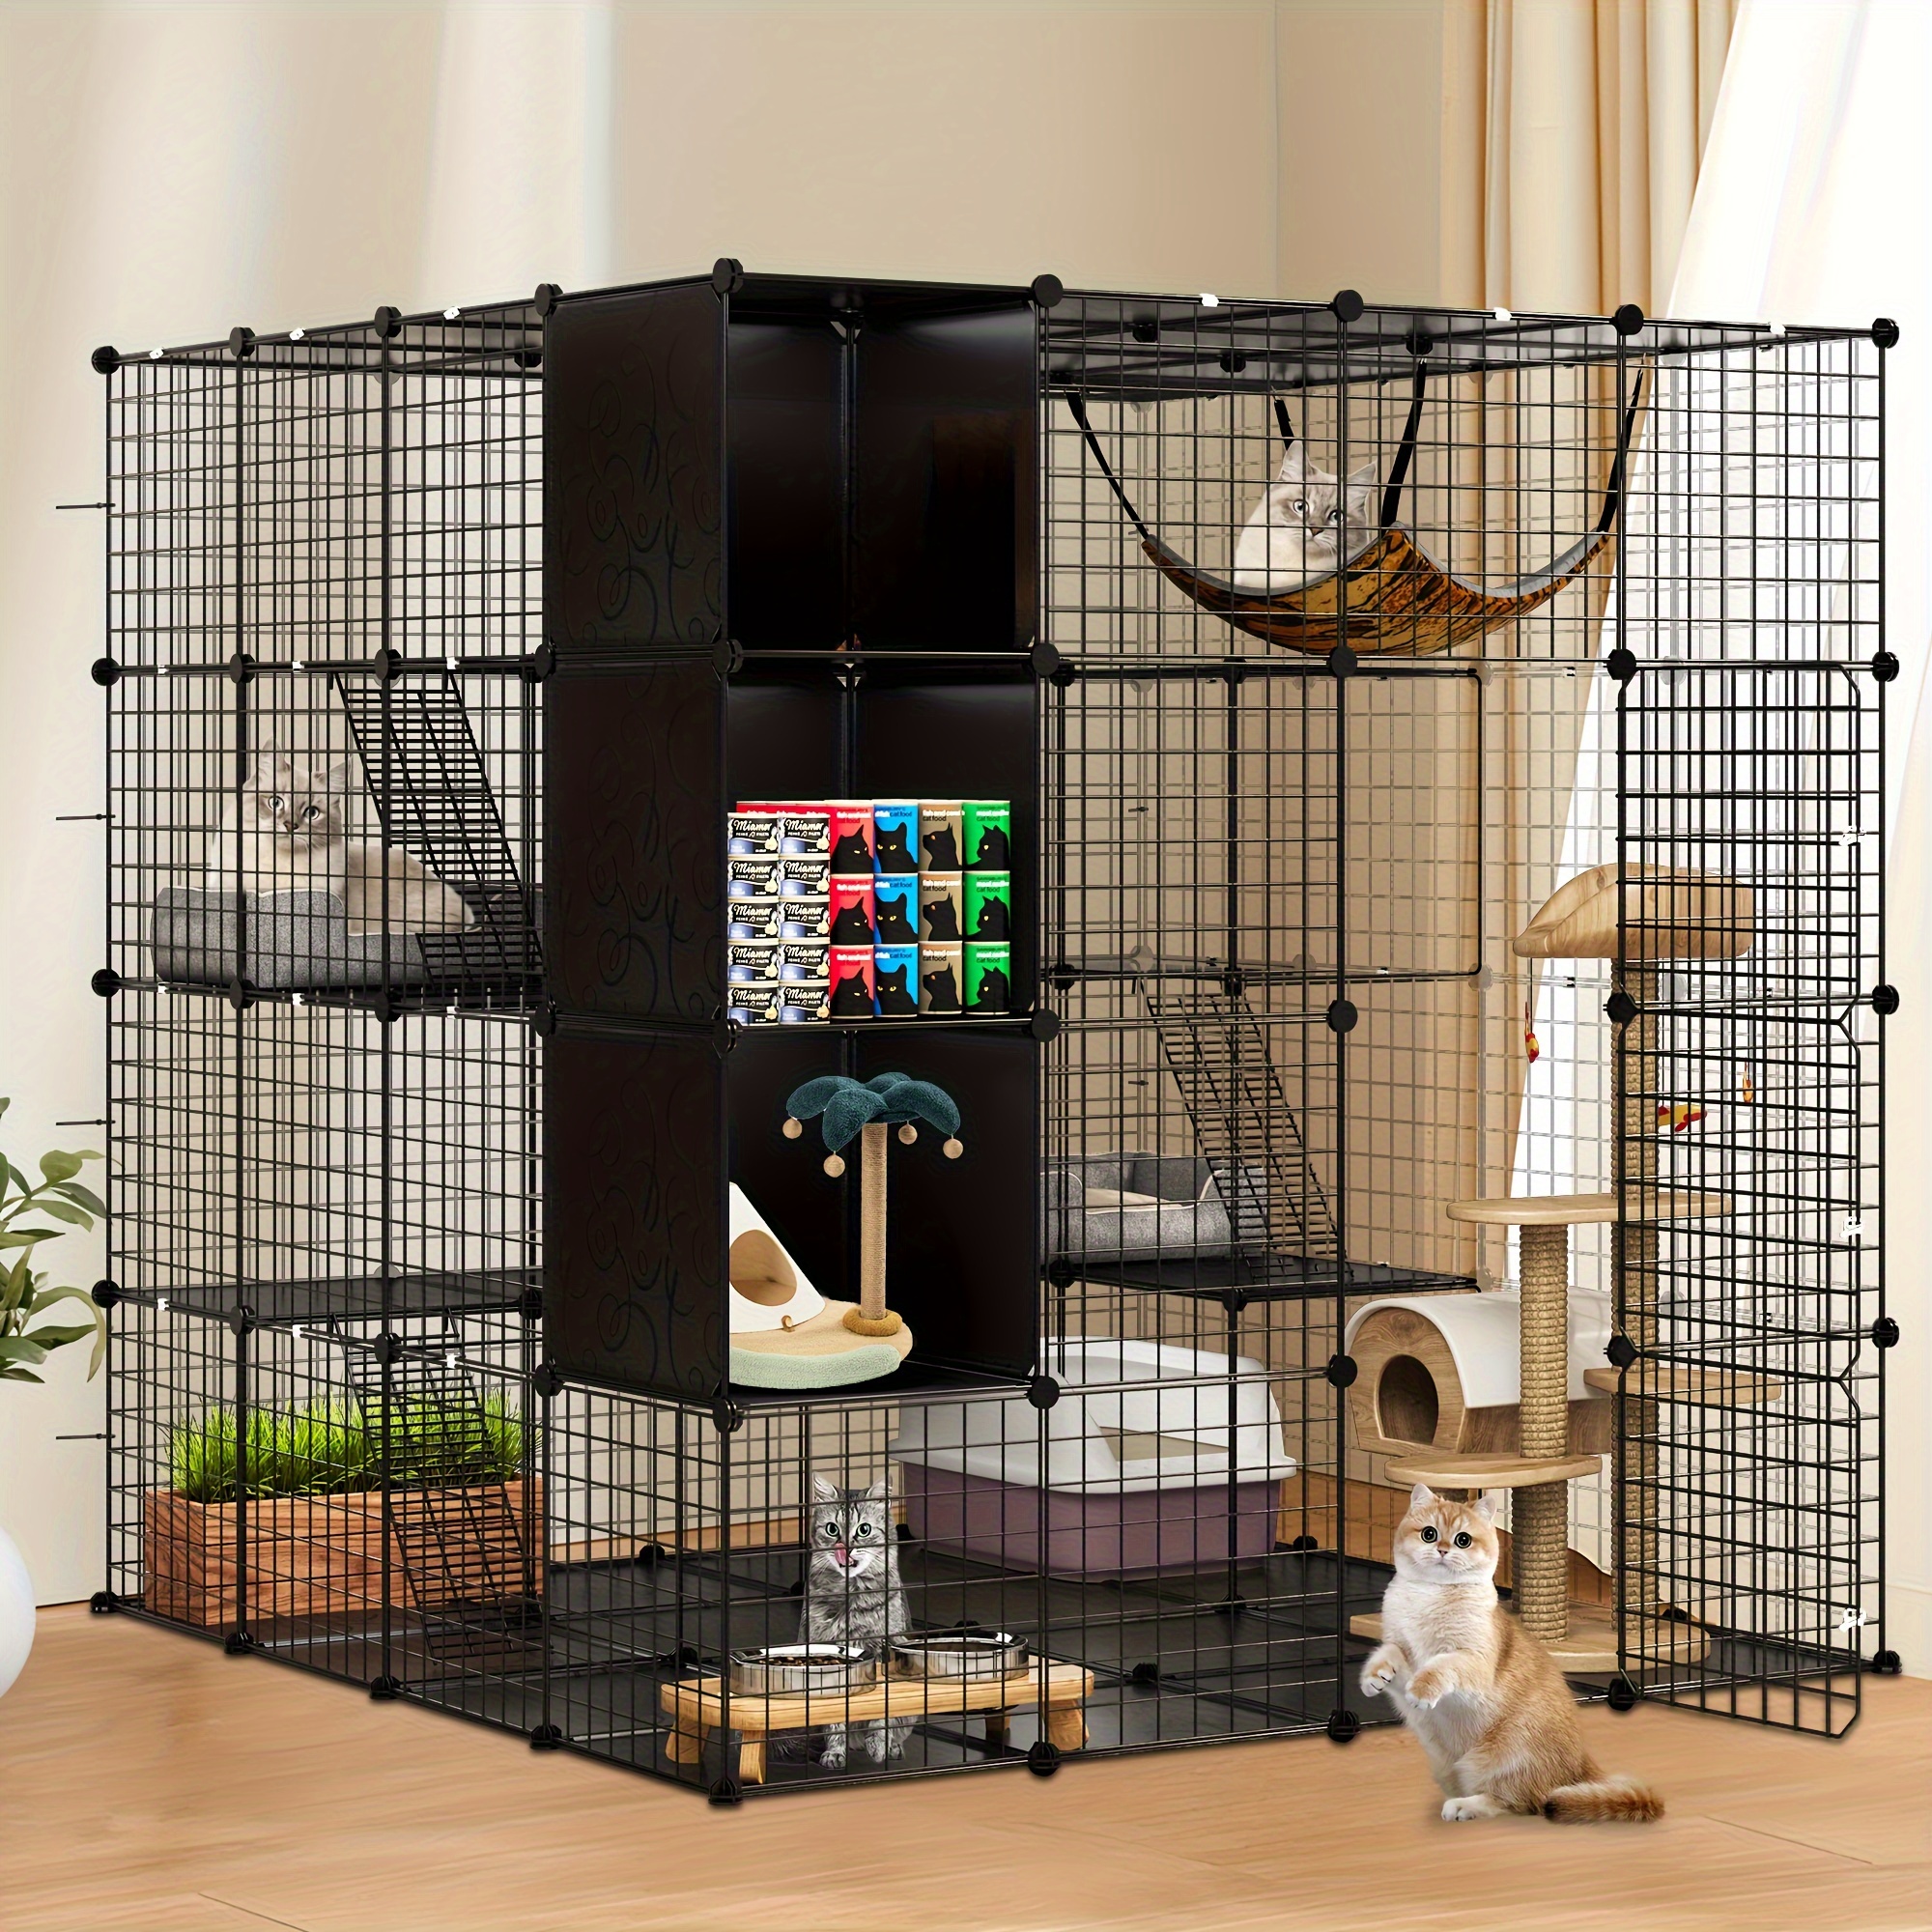 

Yarsca Cat Cage With Storage Cube Diy Indoor Cat Enclosures Metal Cat Playpen, 4 Tiers Cat Kennel, With Large Hammock For 1-4 Cats